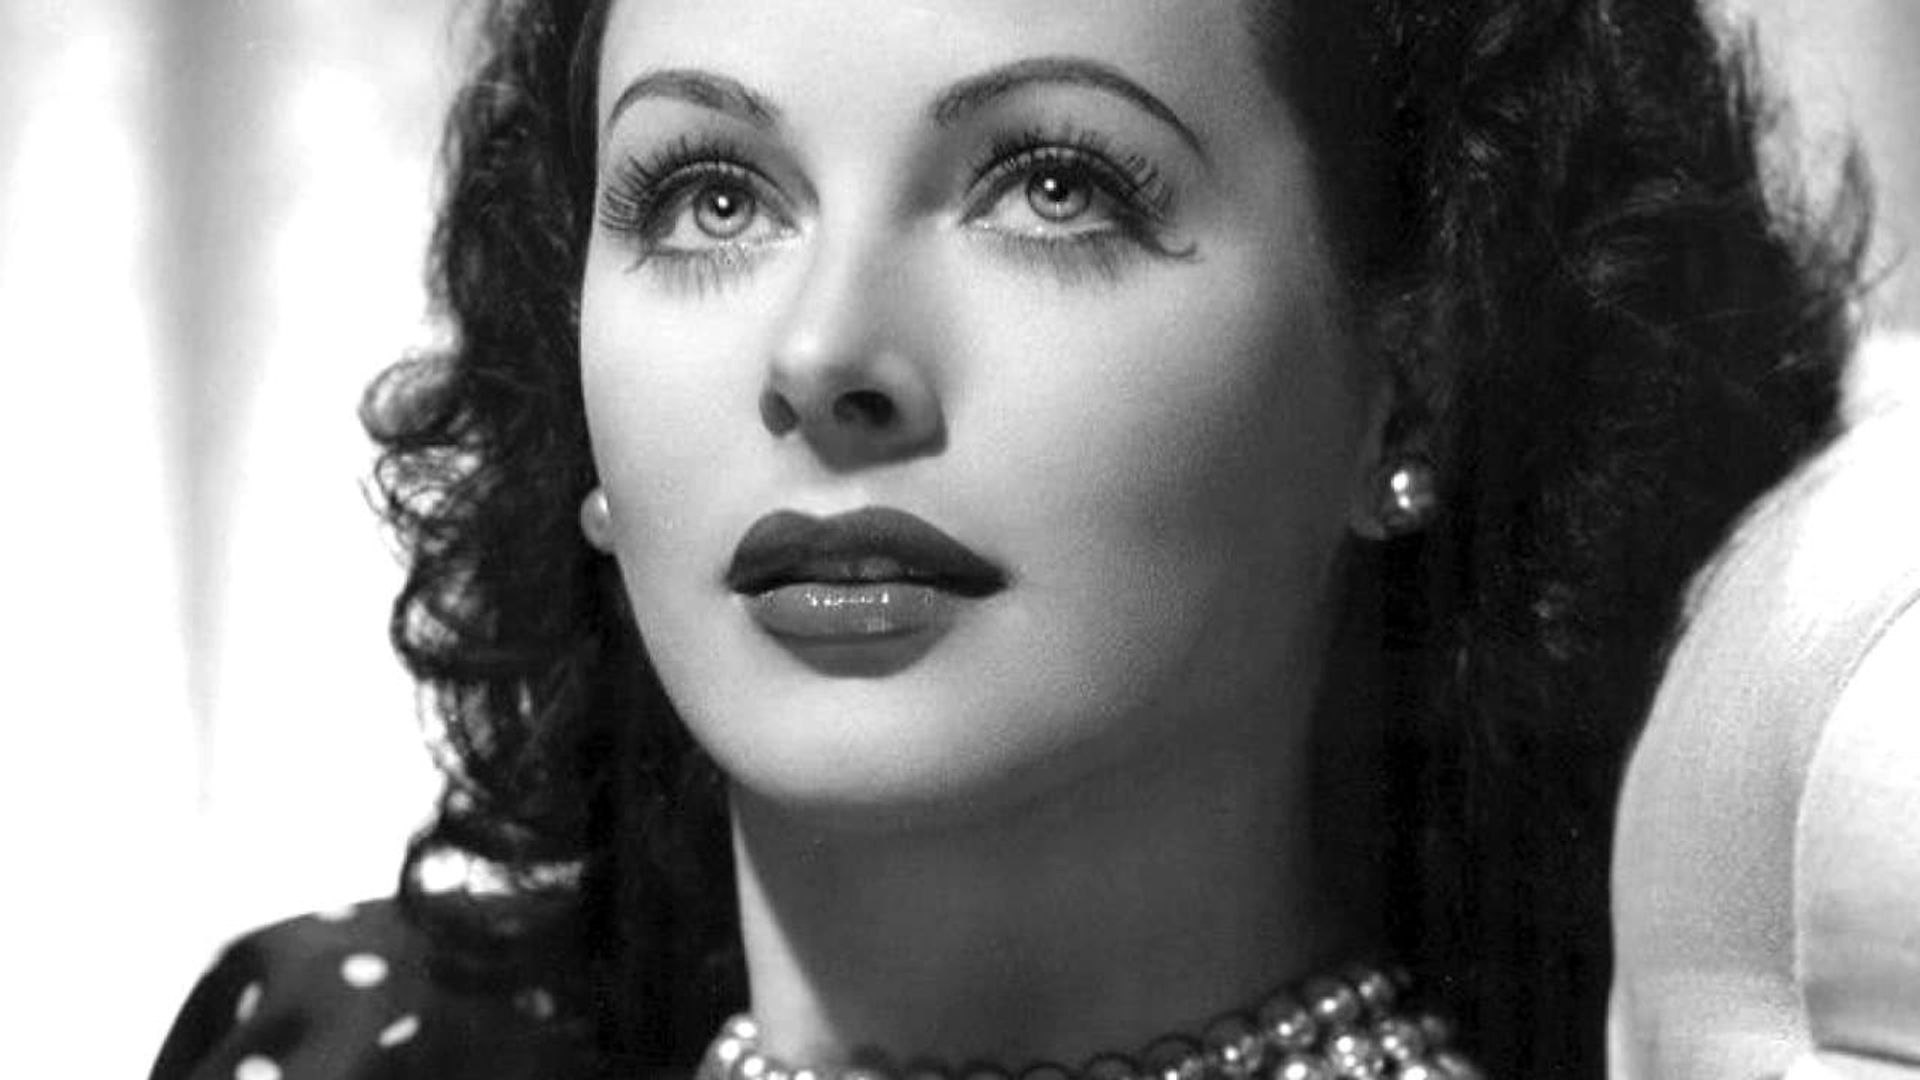 Calling Hedy Lamarr background